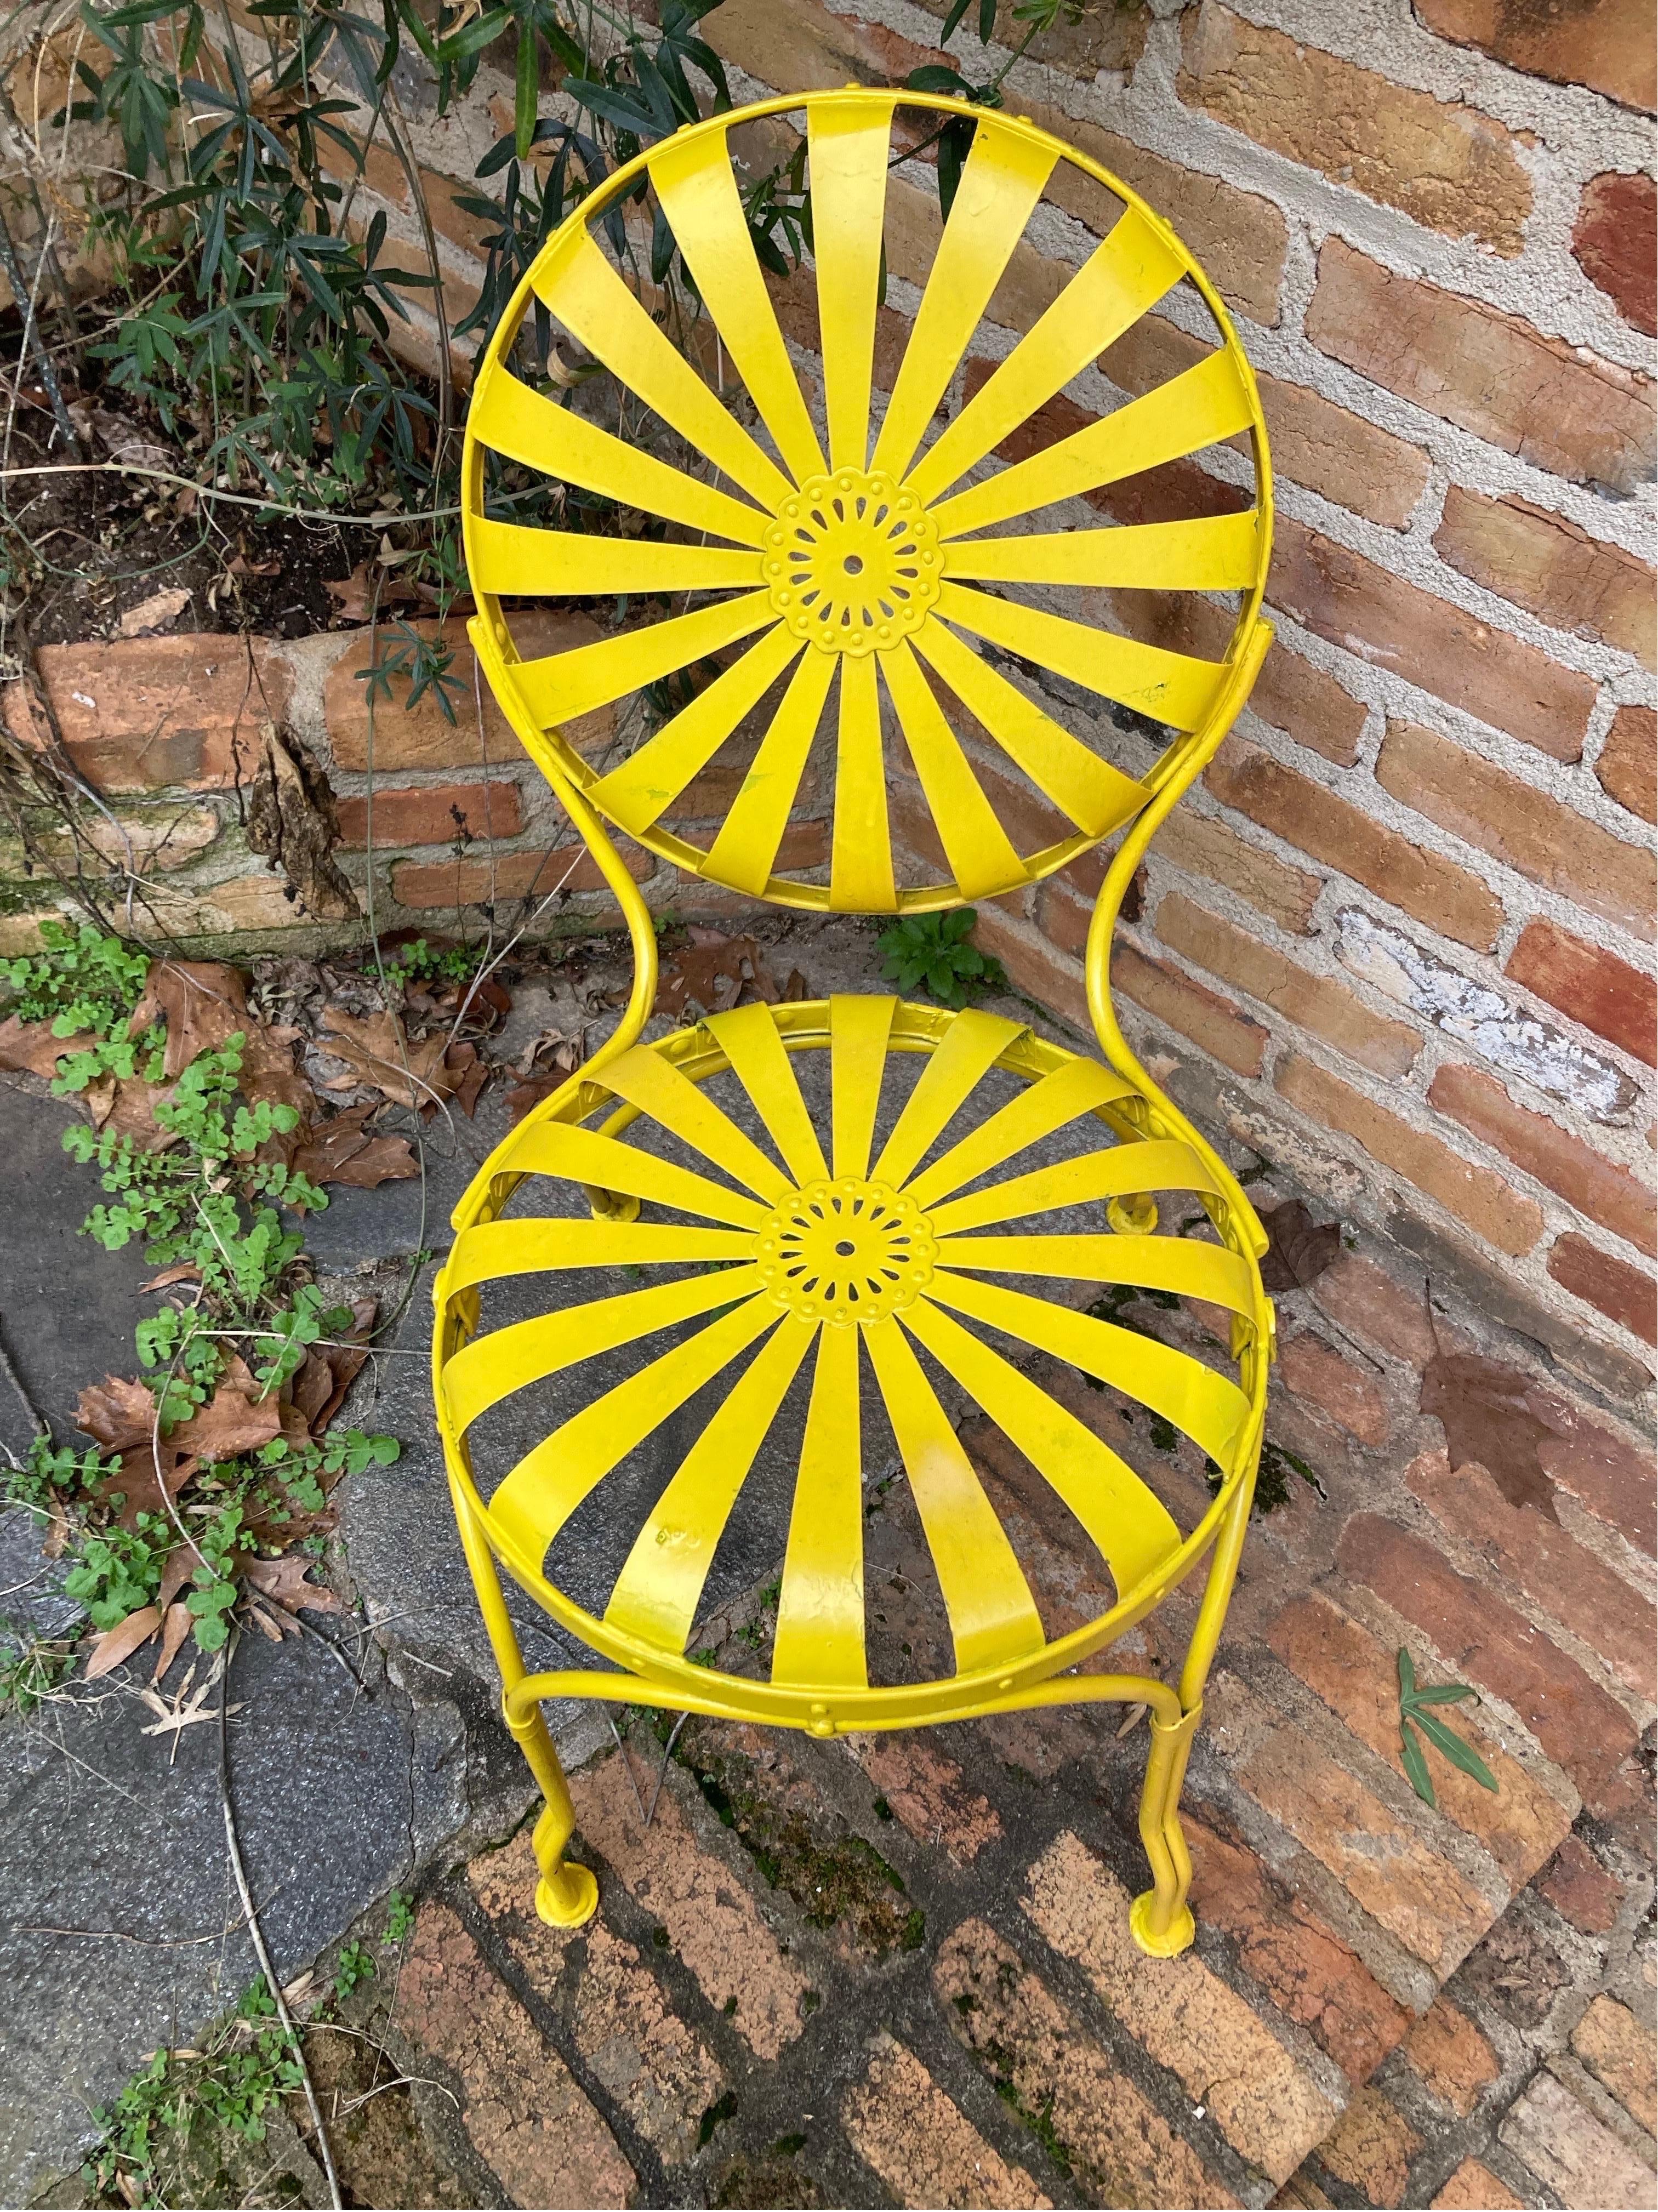 sweet petite carre garden chair, in sunshine gloss yellow… she dates back from 1940, perfect accent piece for the garden or a floating chair for your patio… this can ship in a box as she is smaller than most